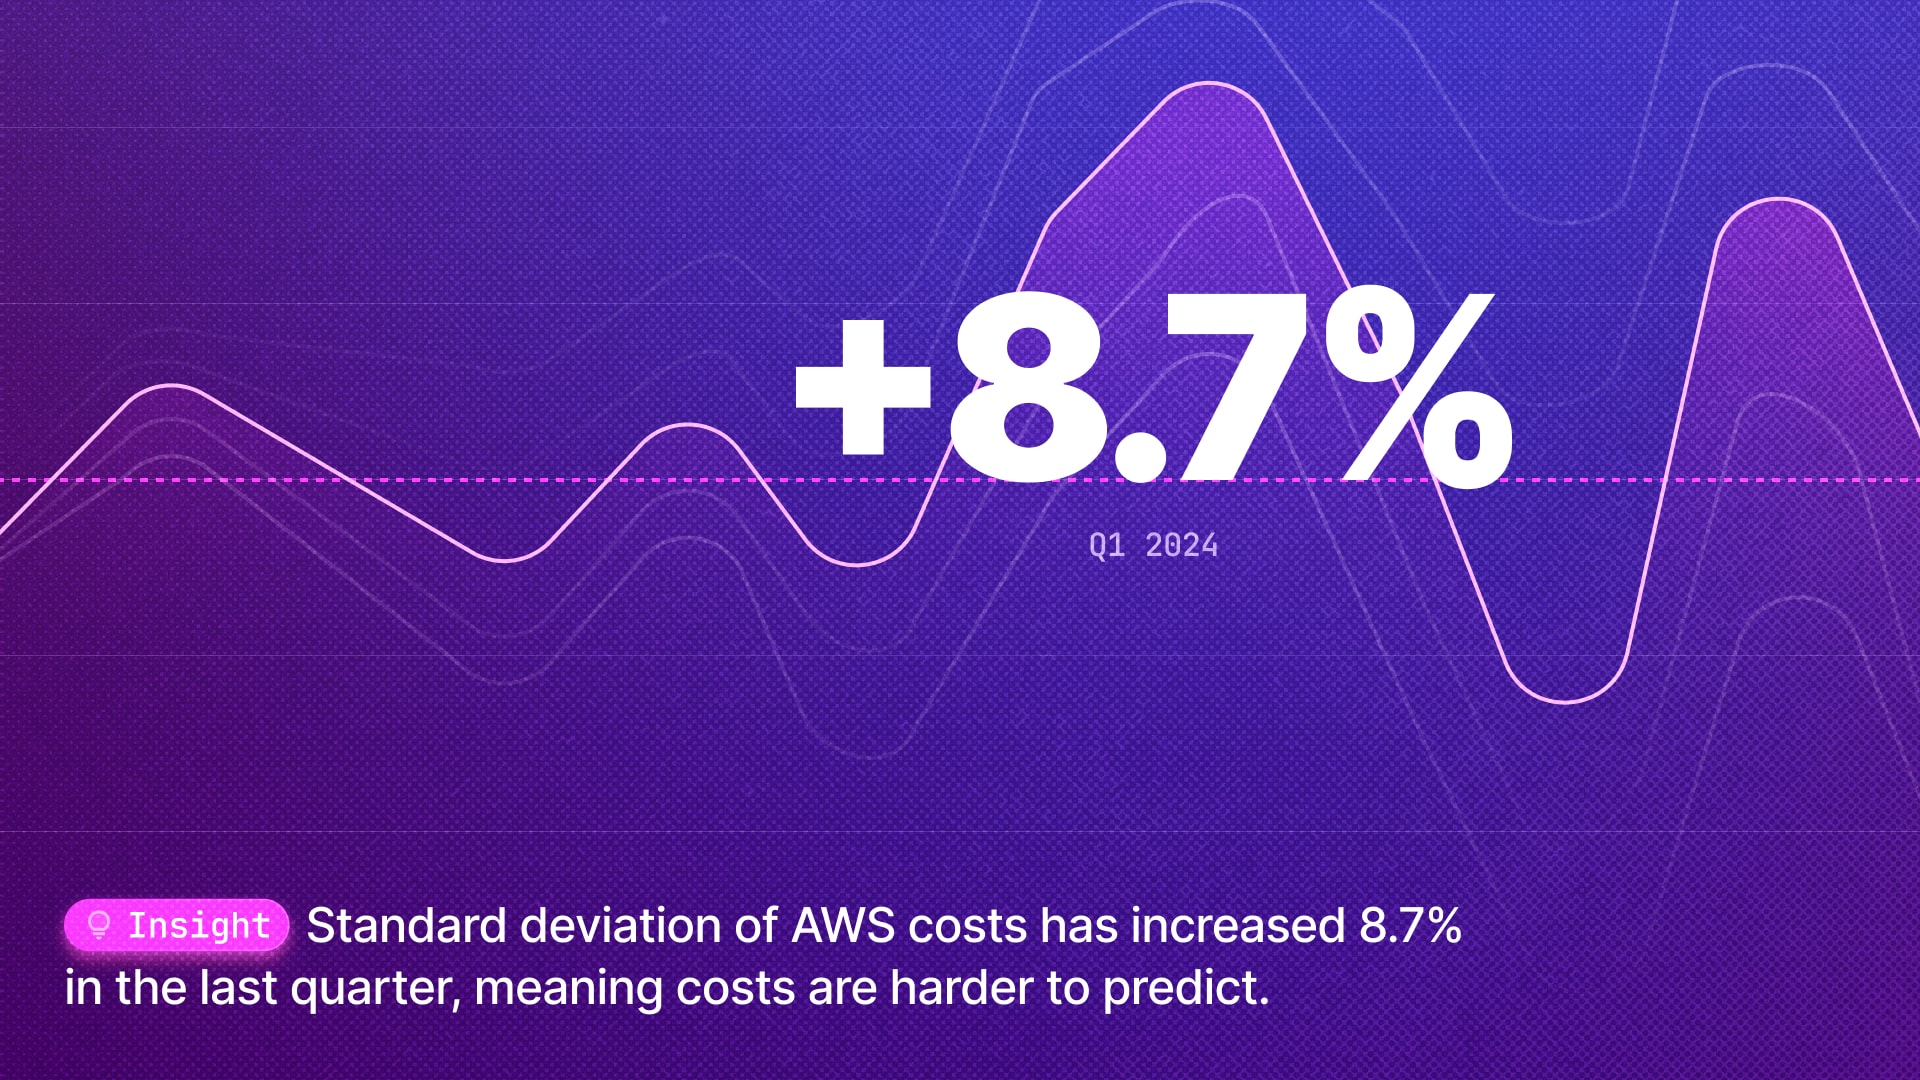 AWS costs are increasingly difficult to predict